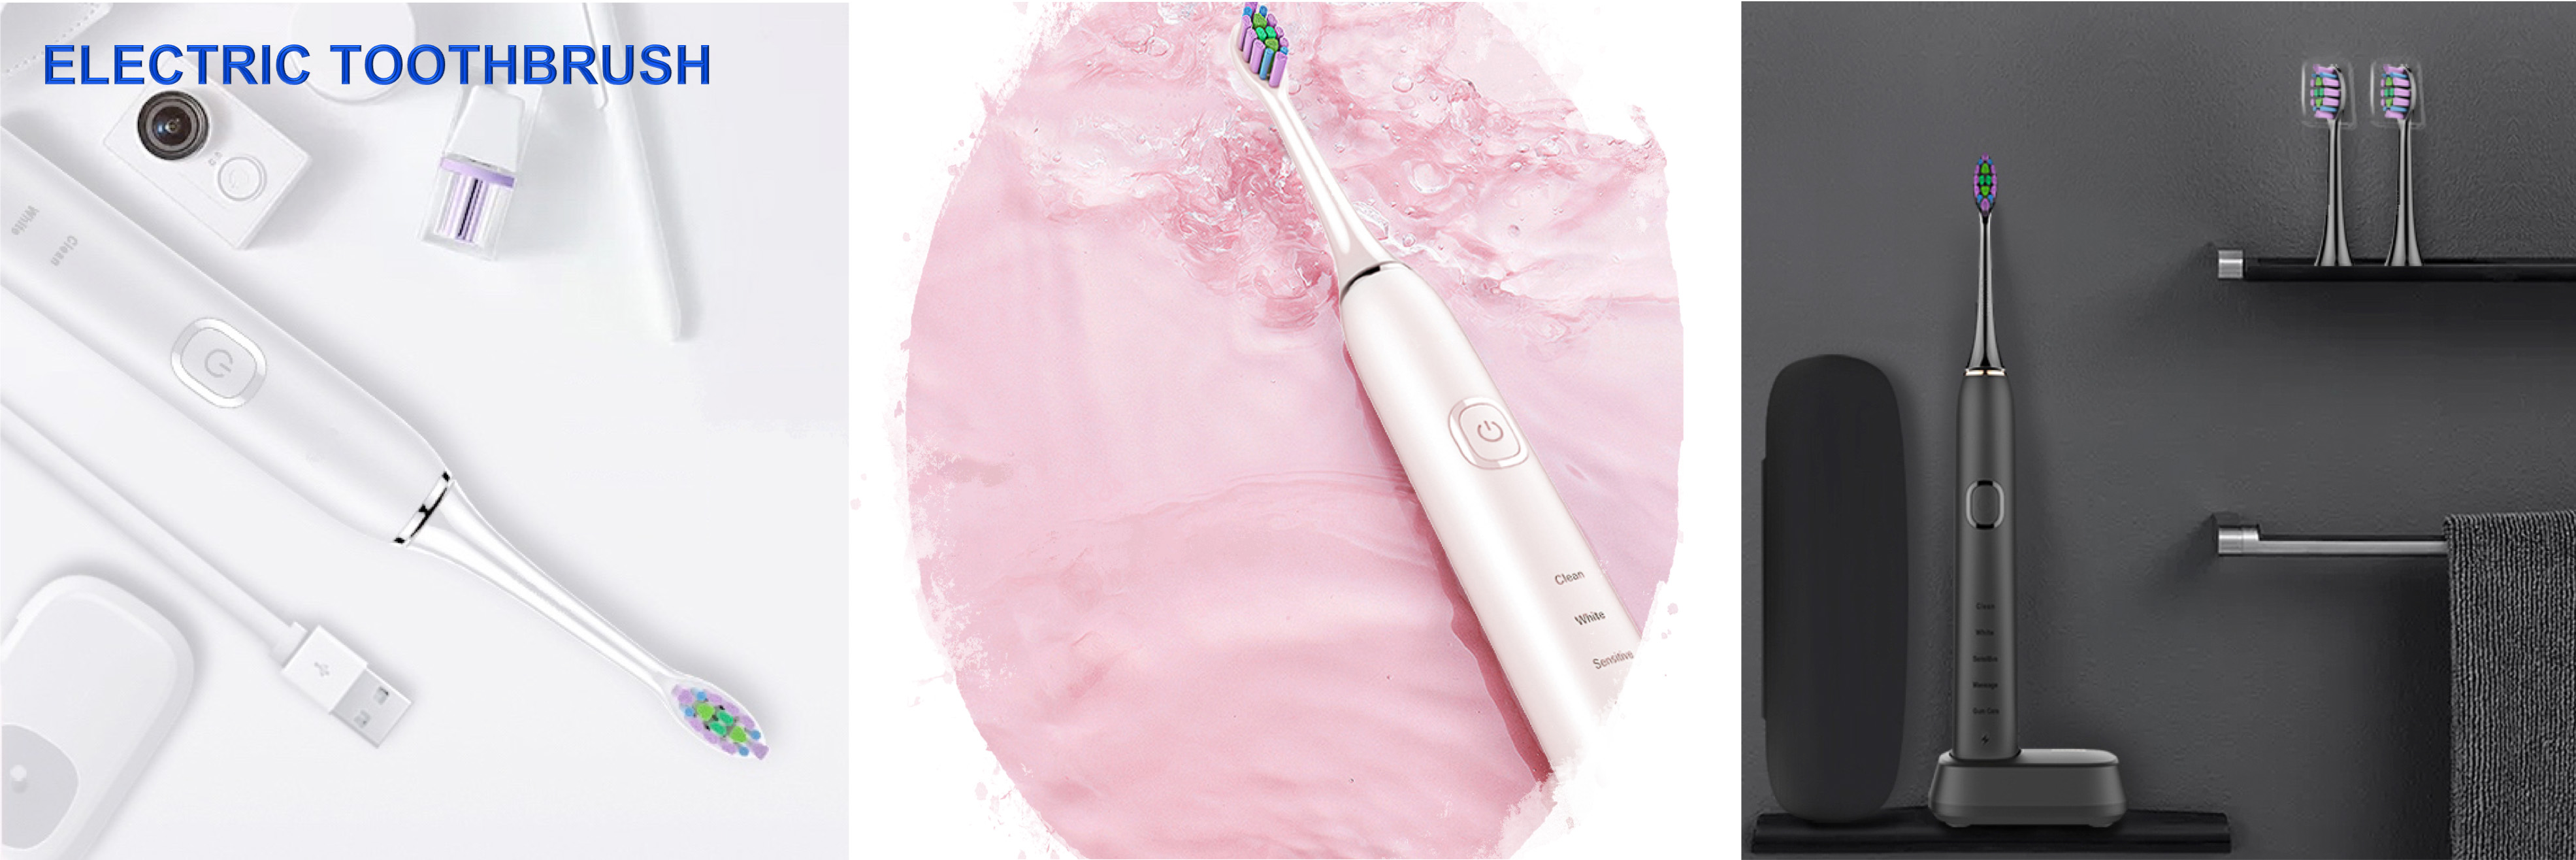 BEST ELECTRIC TOOTHBRUSH